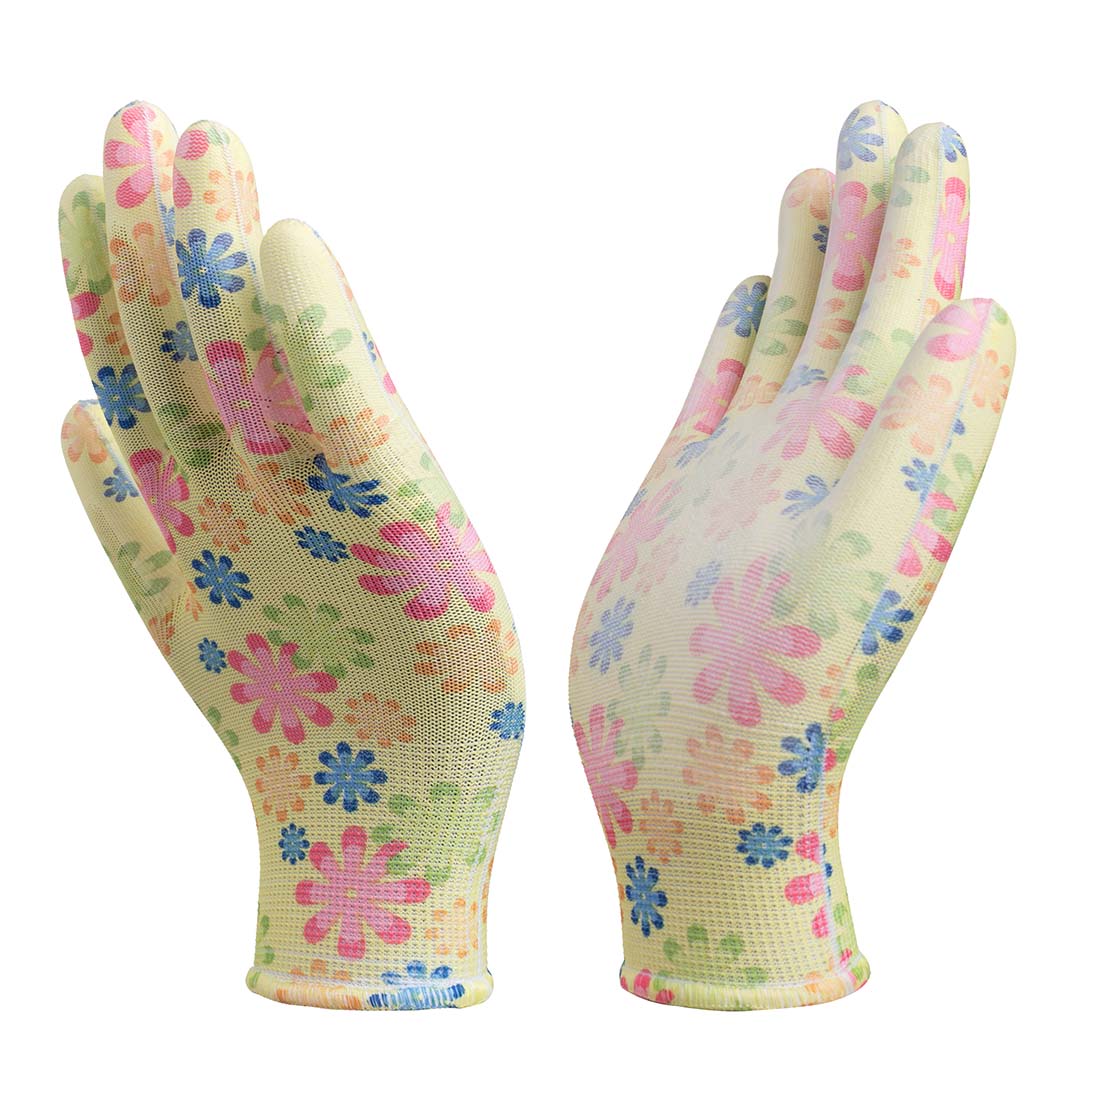 13G printed polyester glove PU palm coated 